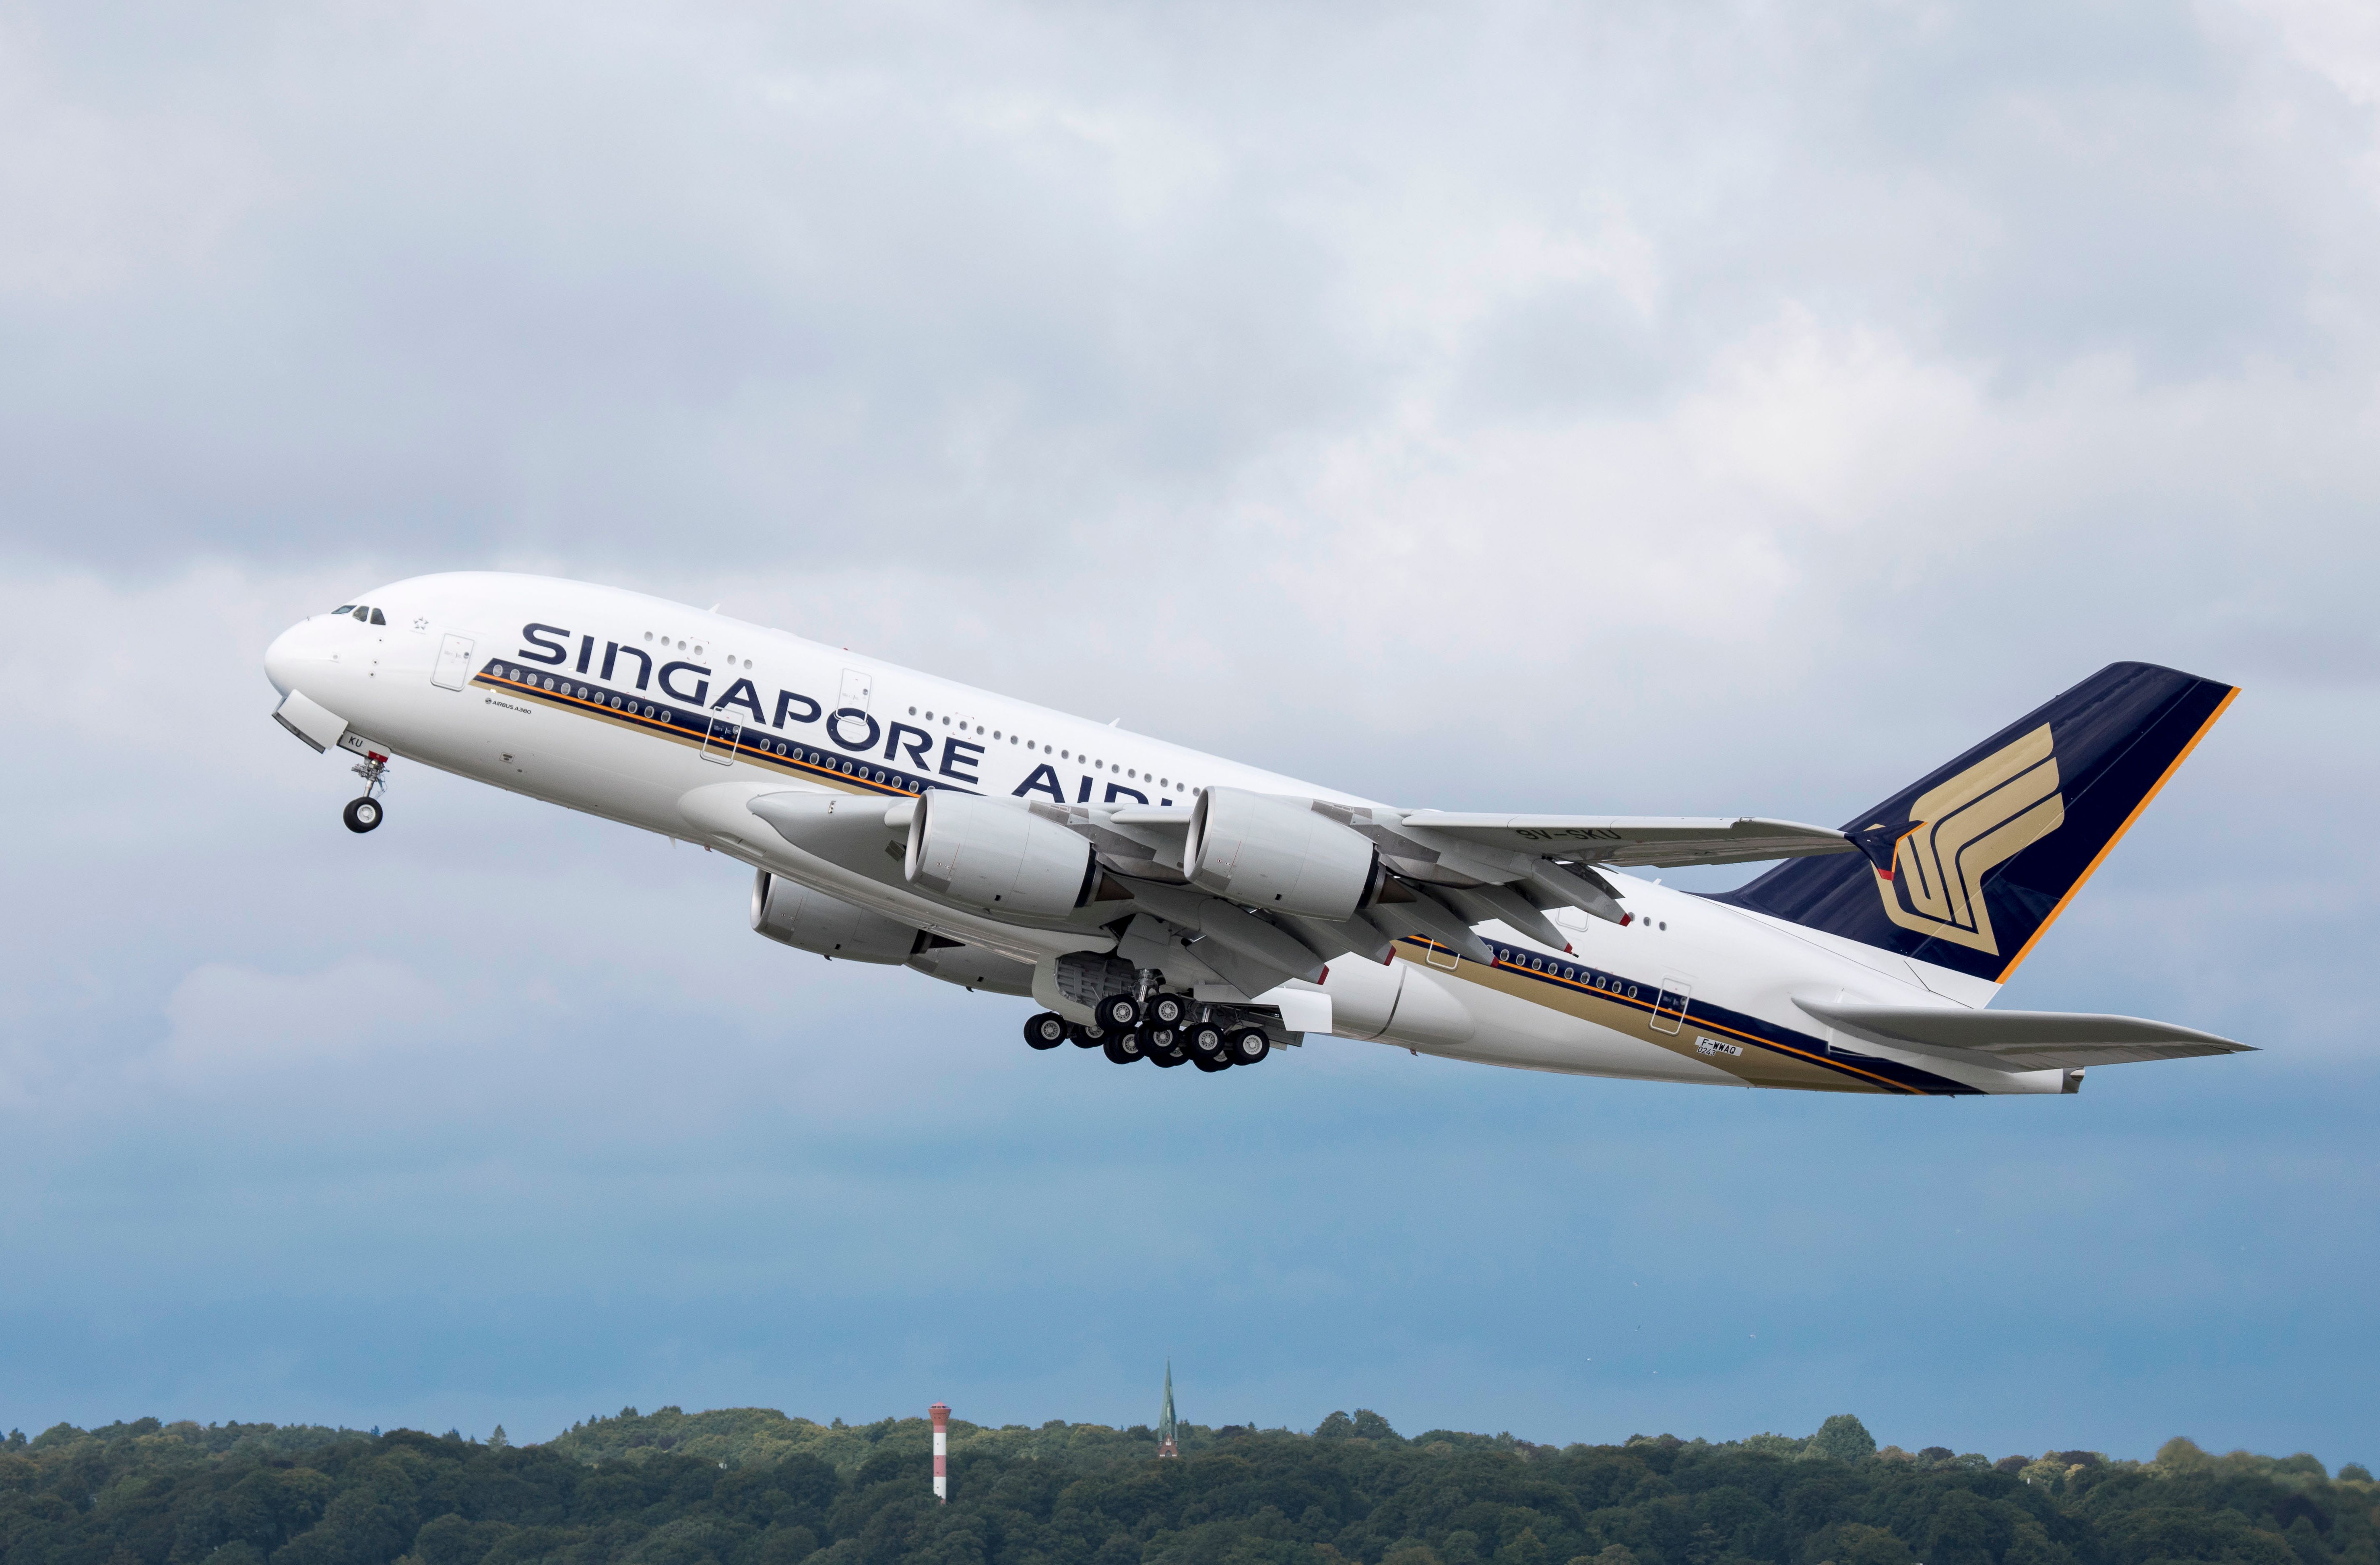 Singapore Airlines A380 taking off